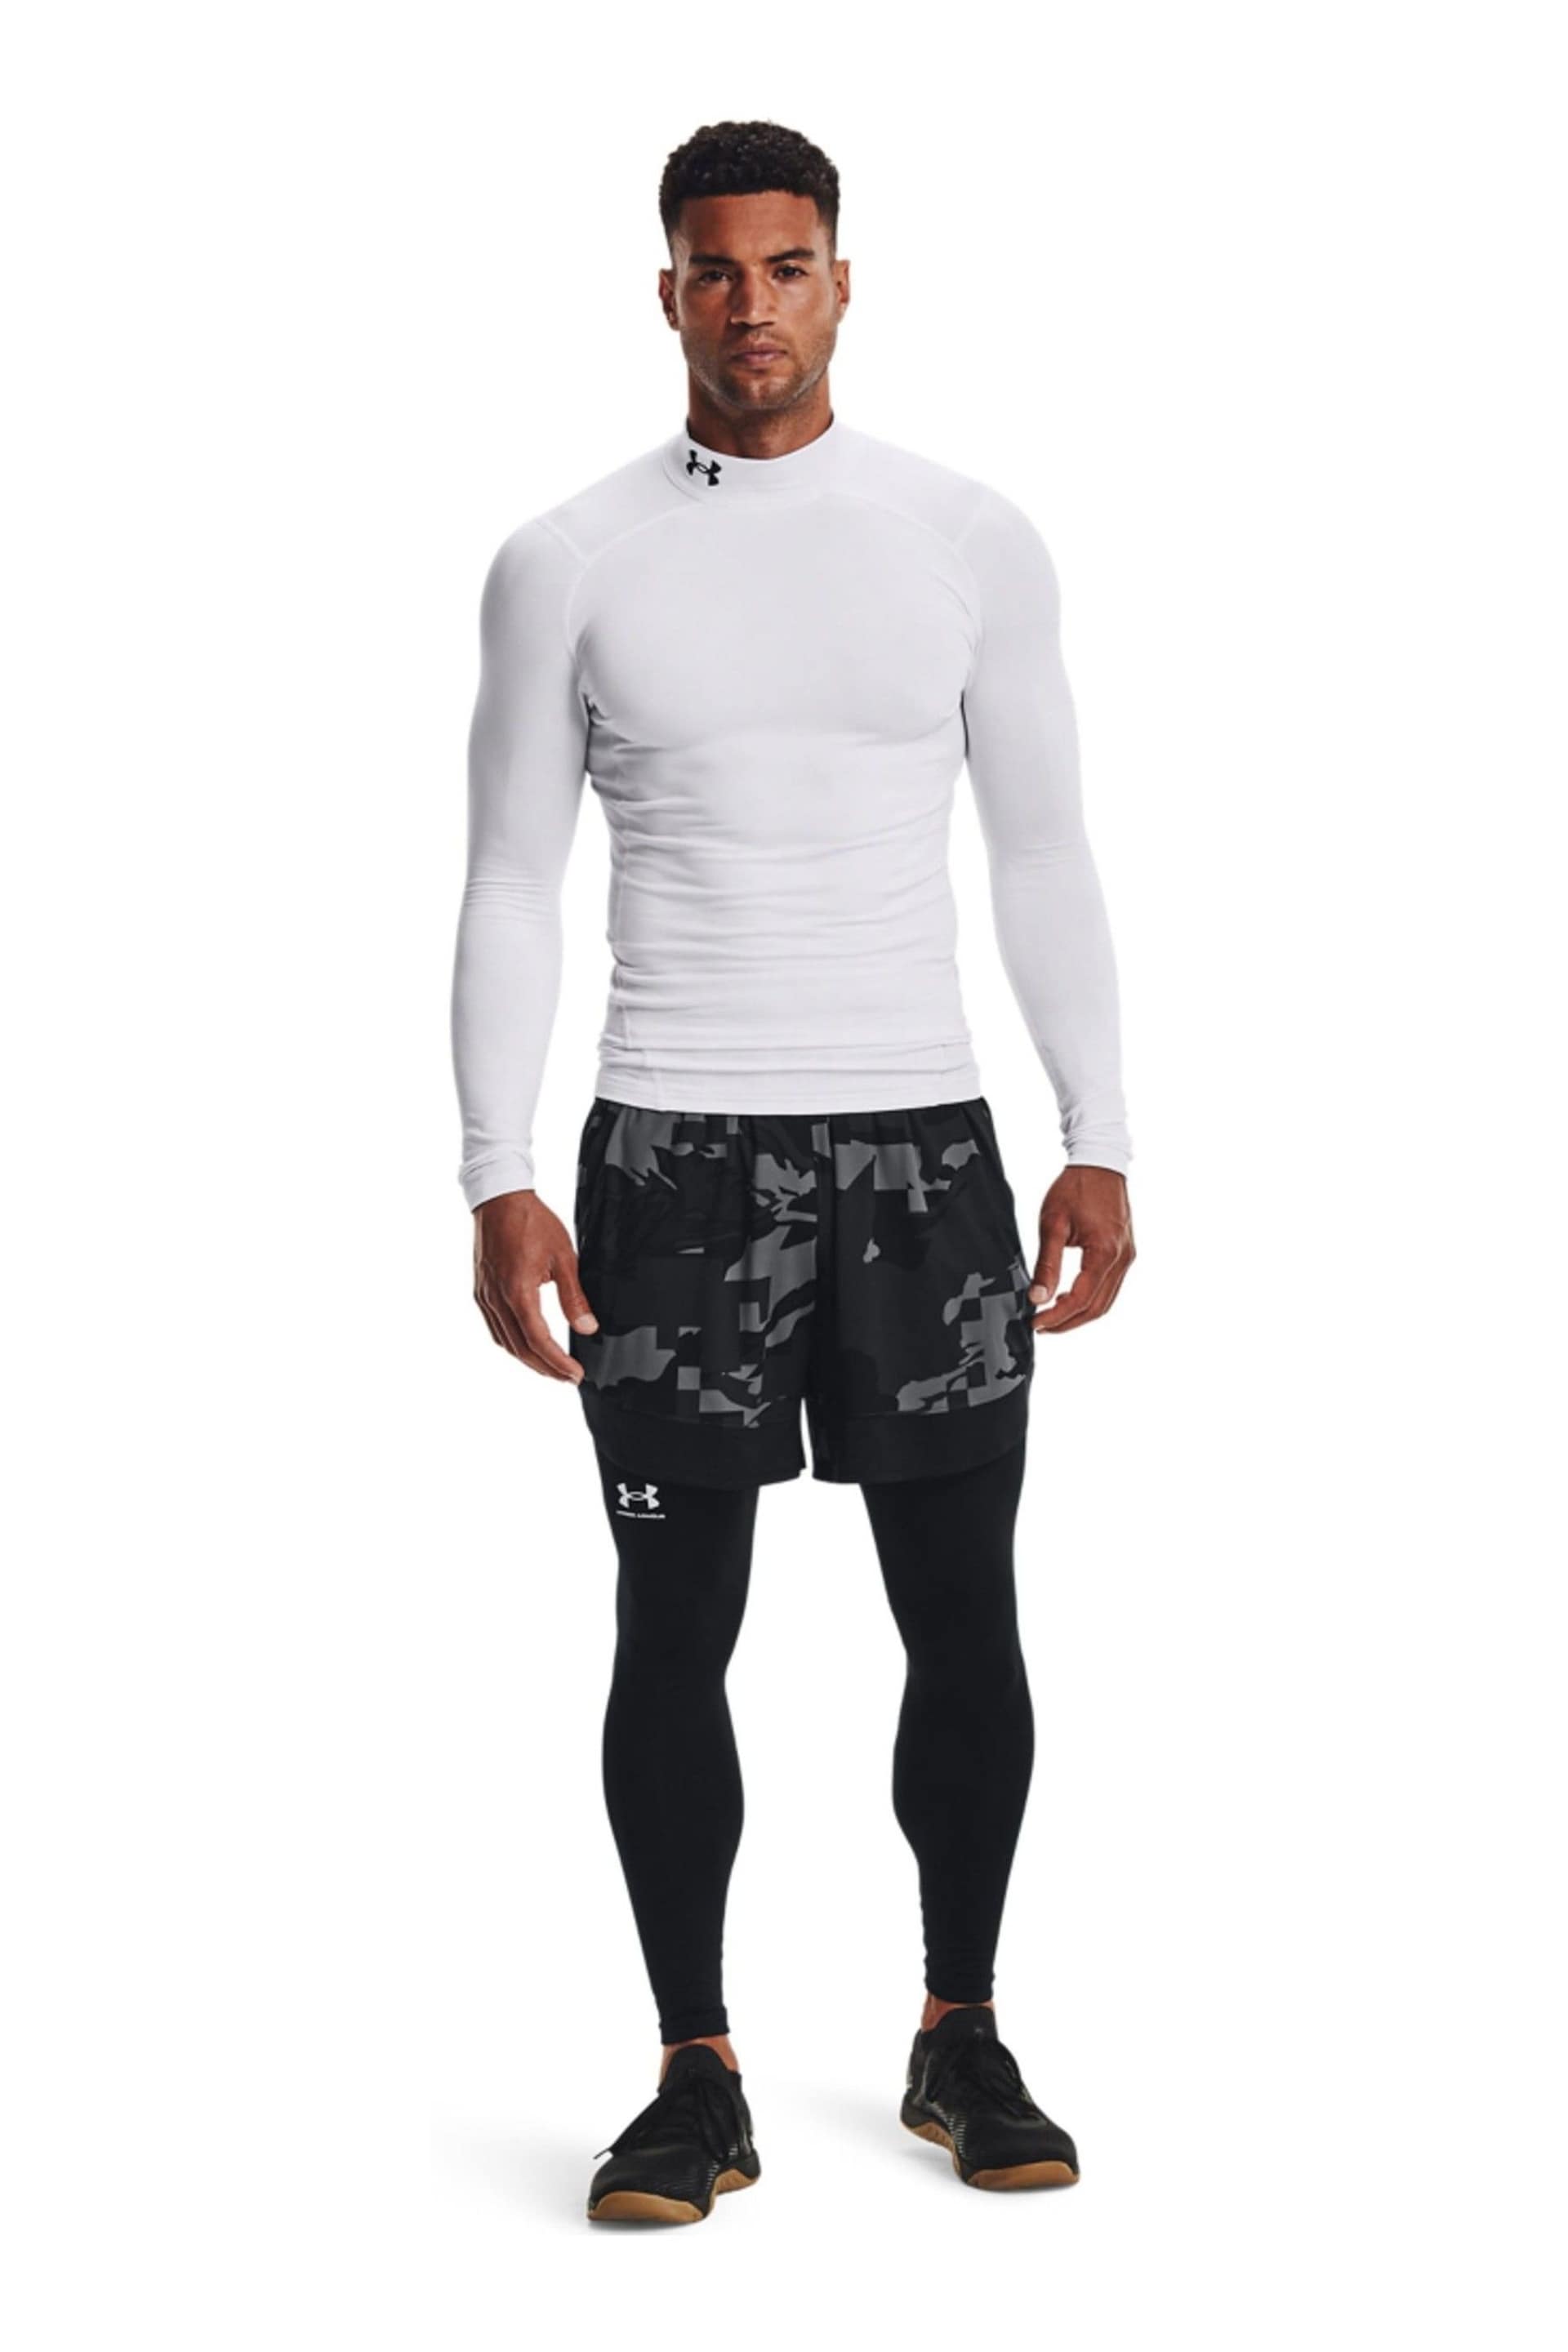 Under Armour White Cold Gear Base Layer T-Shirt - Image 3 of 6